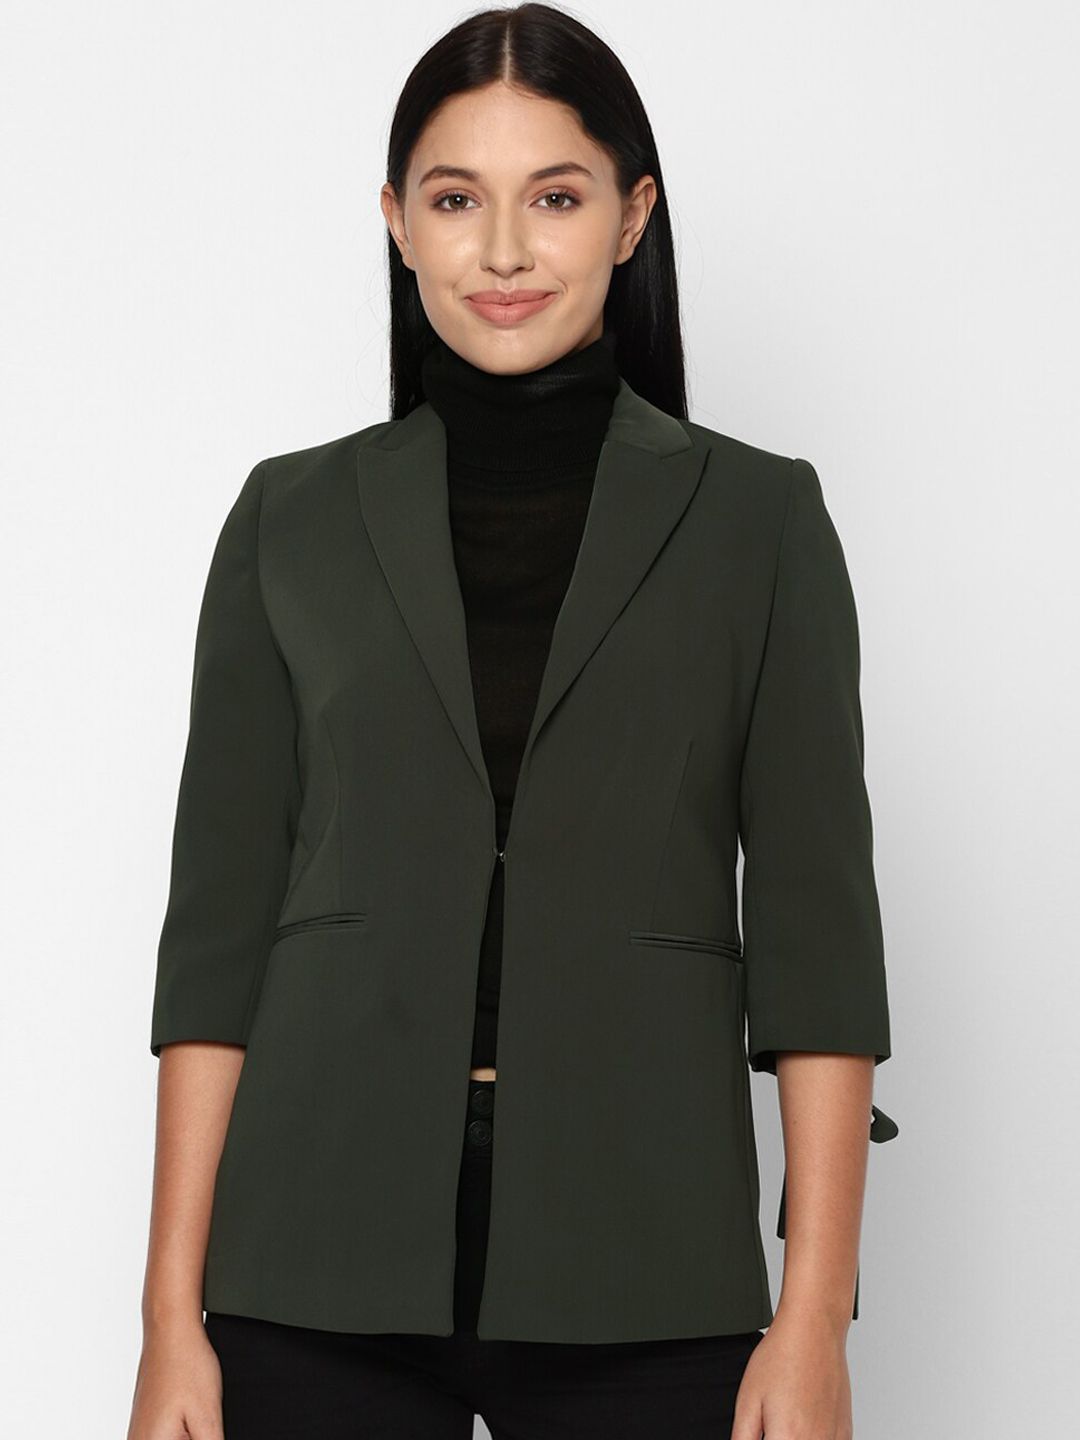 Allen Solly Woman Women Green Single-Breasted Casual Blazer Price in India